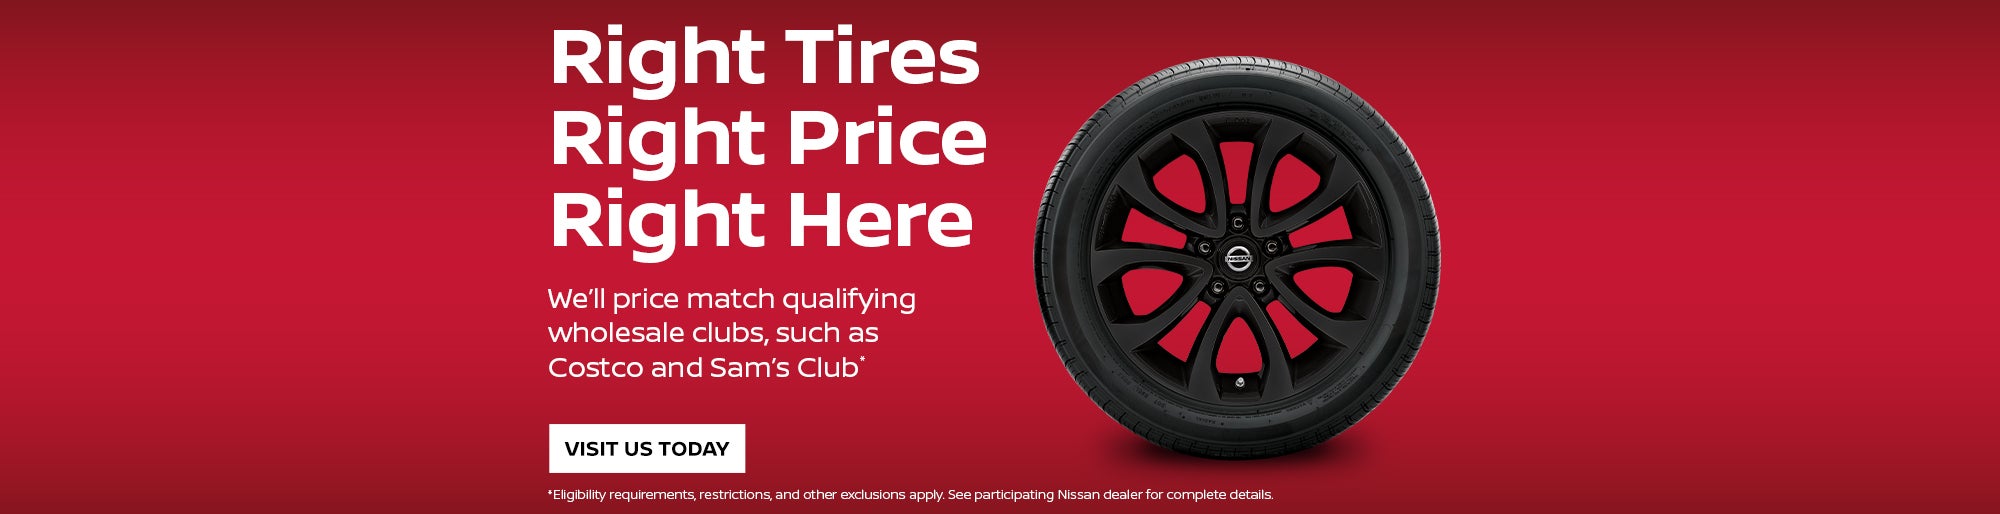 Right Tires, Right Price, Right Here